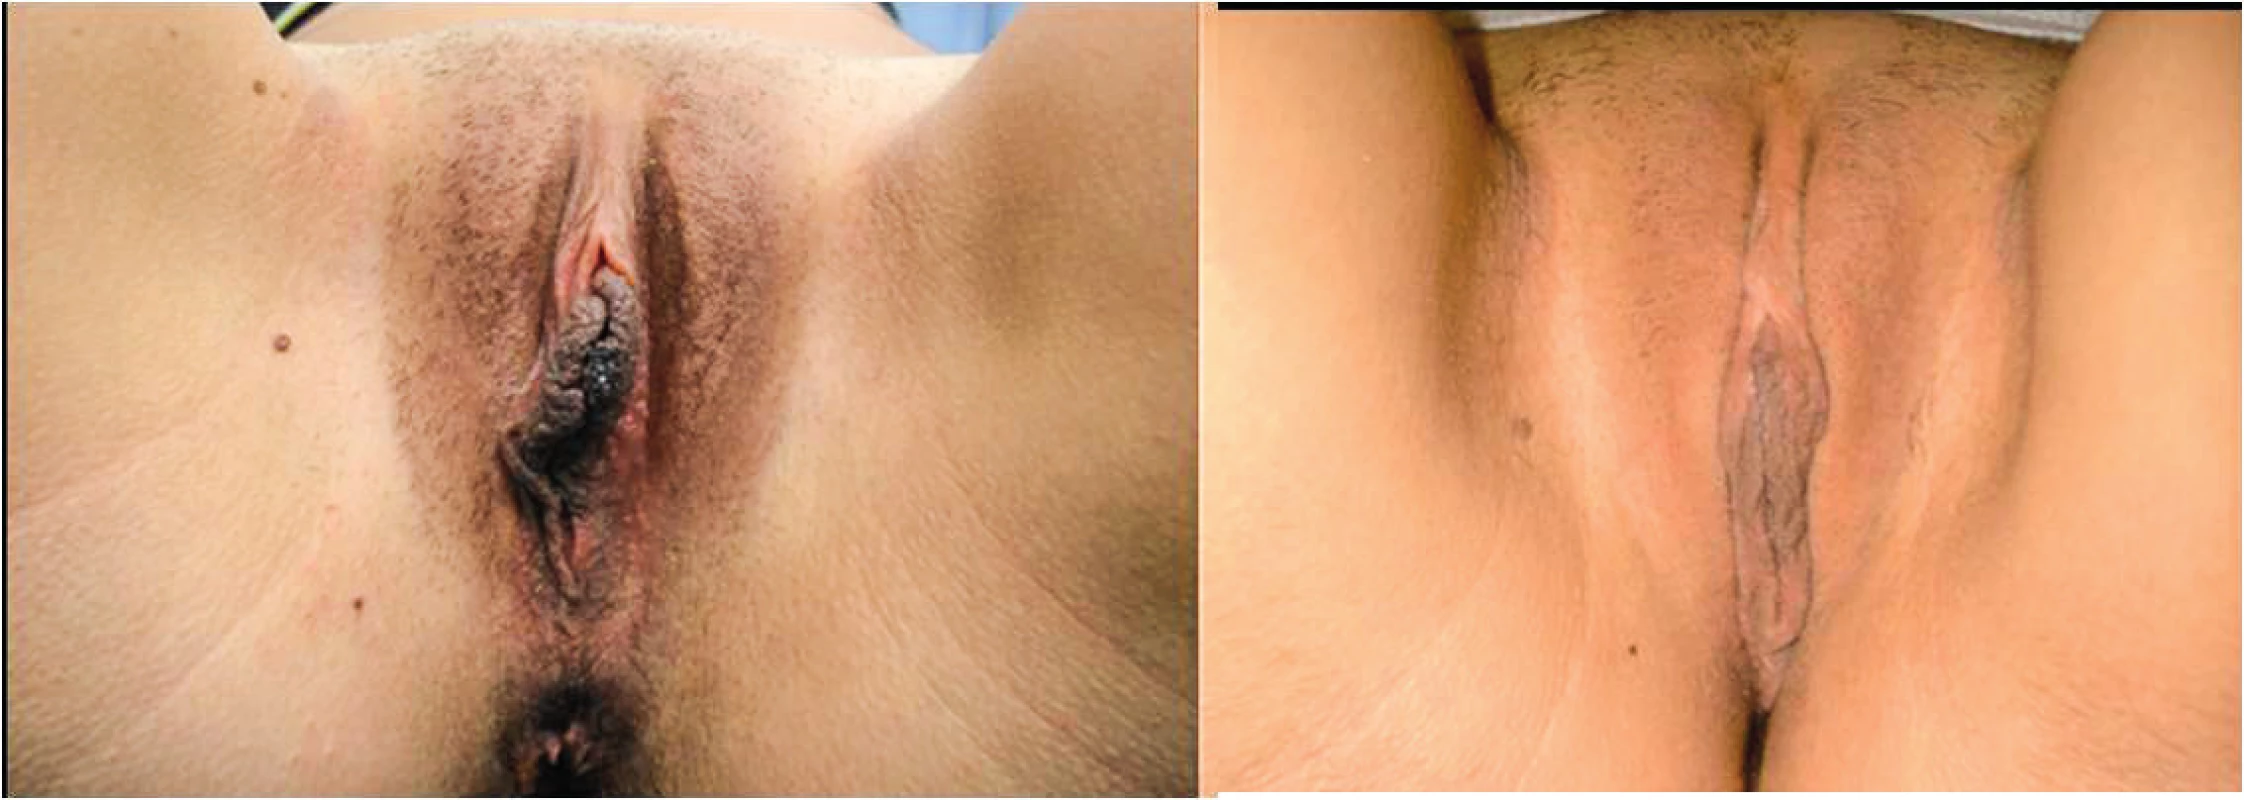 (Left) Pre-operative view in a 27 years old patient. (Right) Post-operative view at 1 year